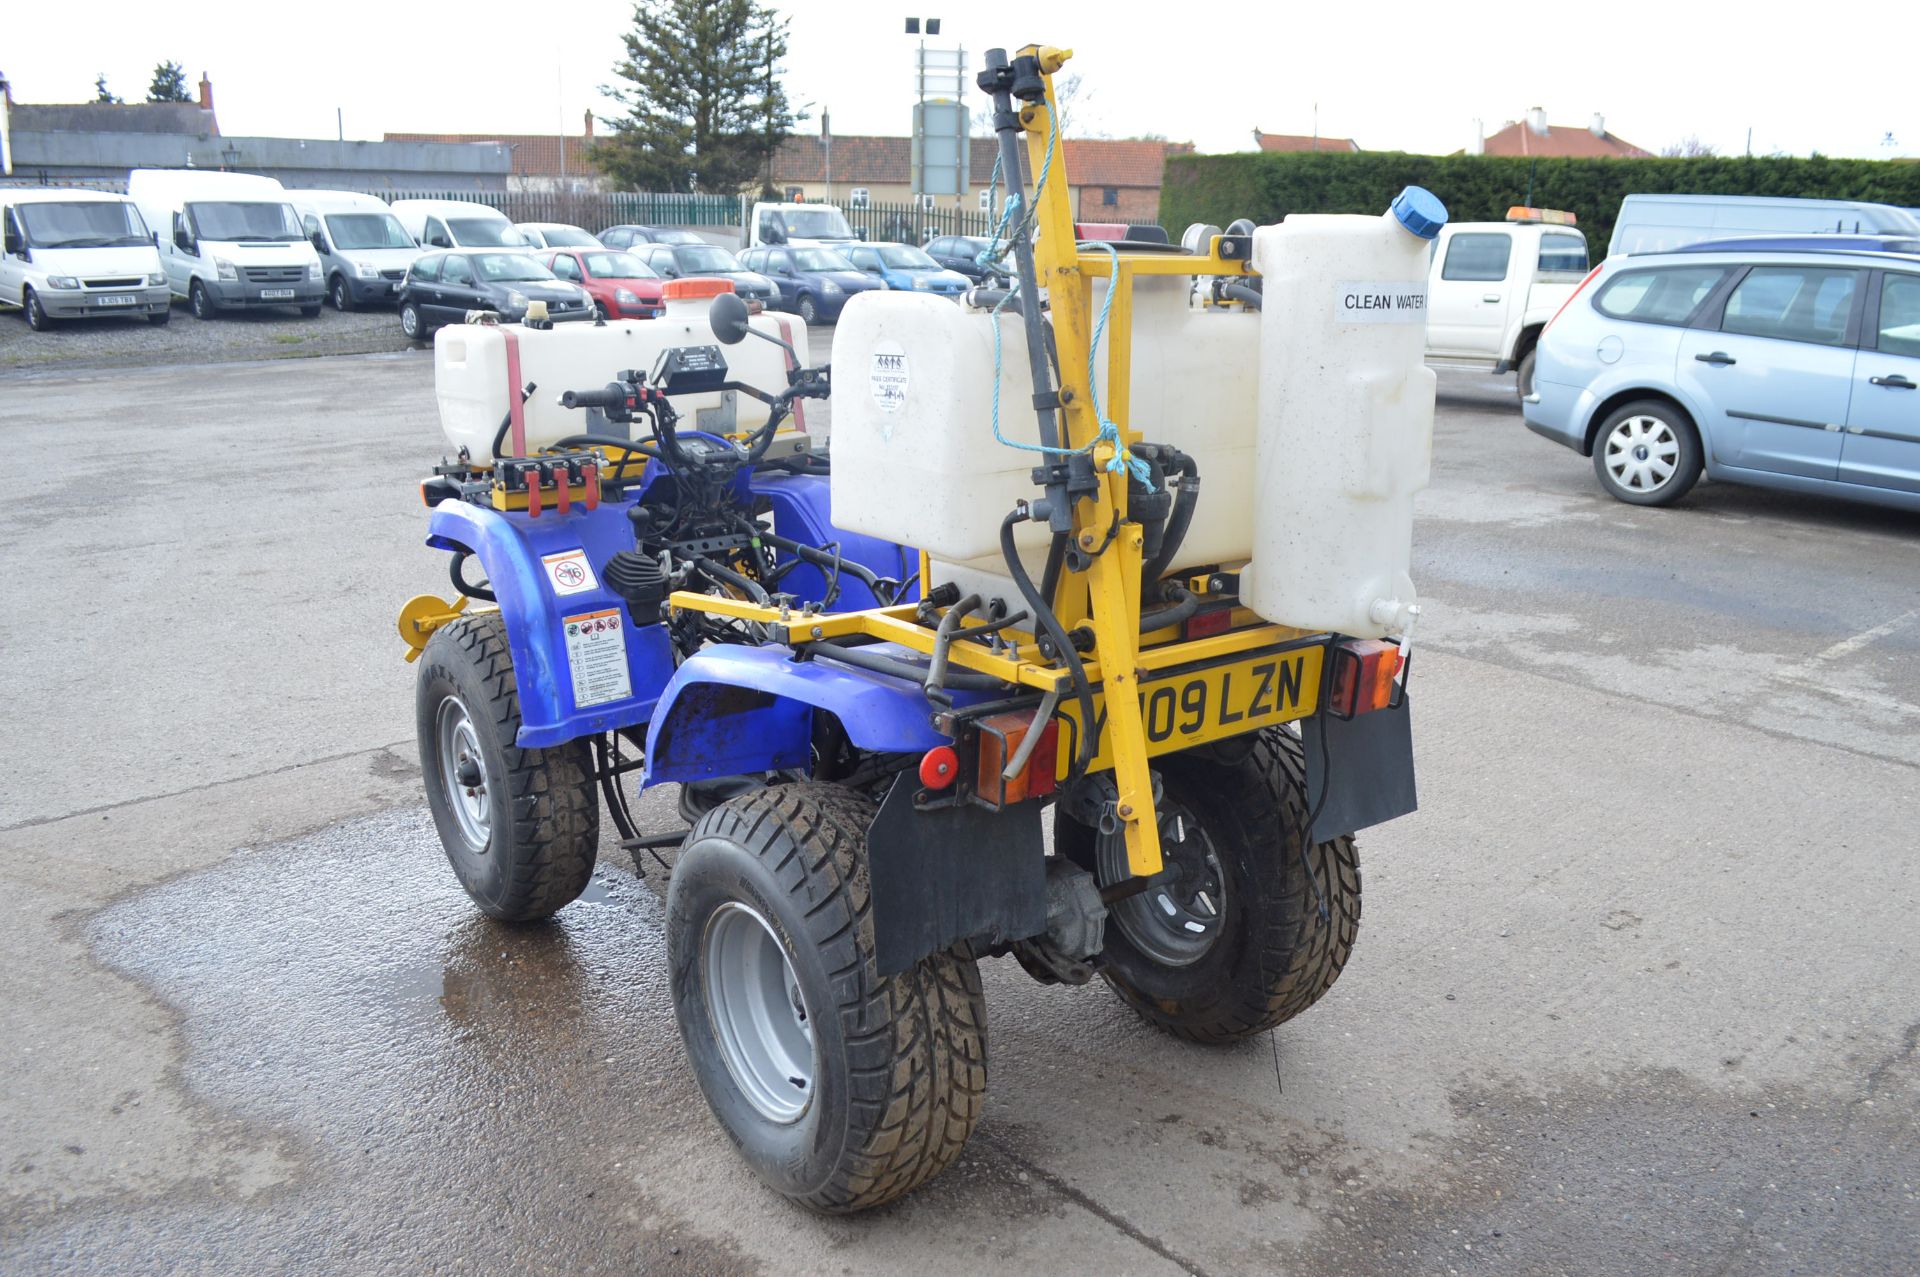 2009 YAMAHA QUAD BIKE WITH 2 SPRAYERS - 1 OWNER FROM NEW - Image 5 of 22